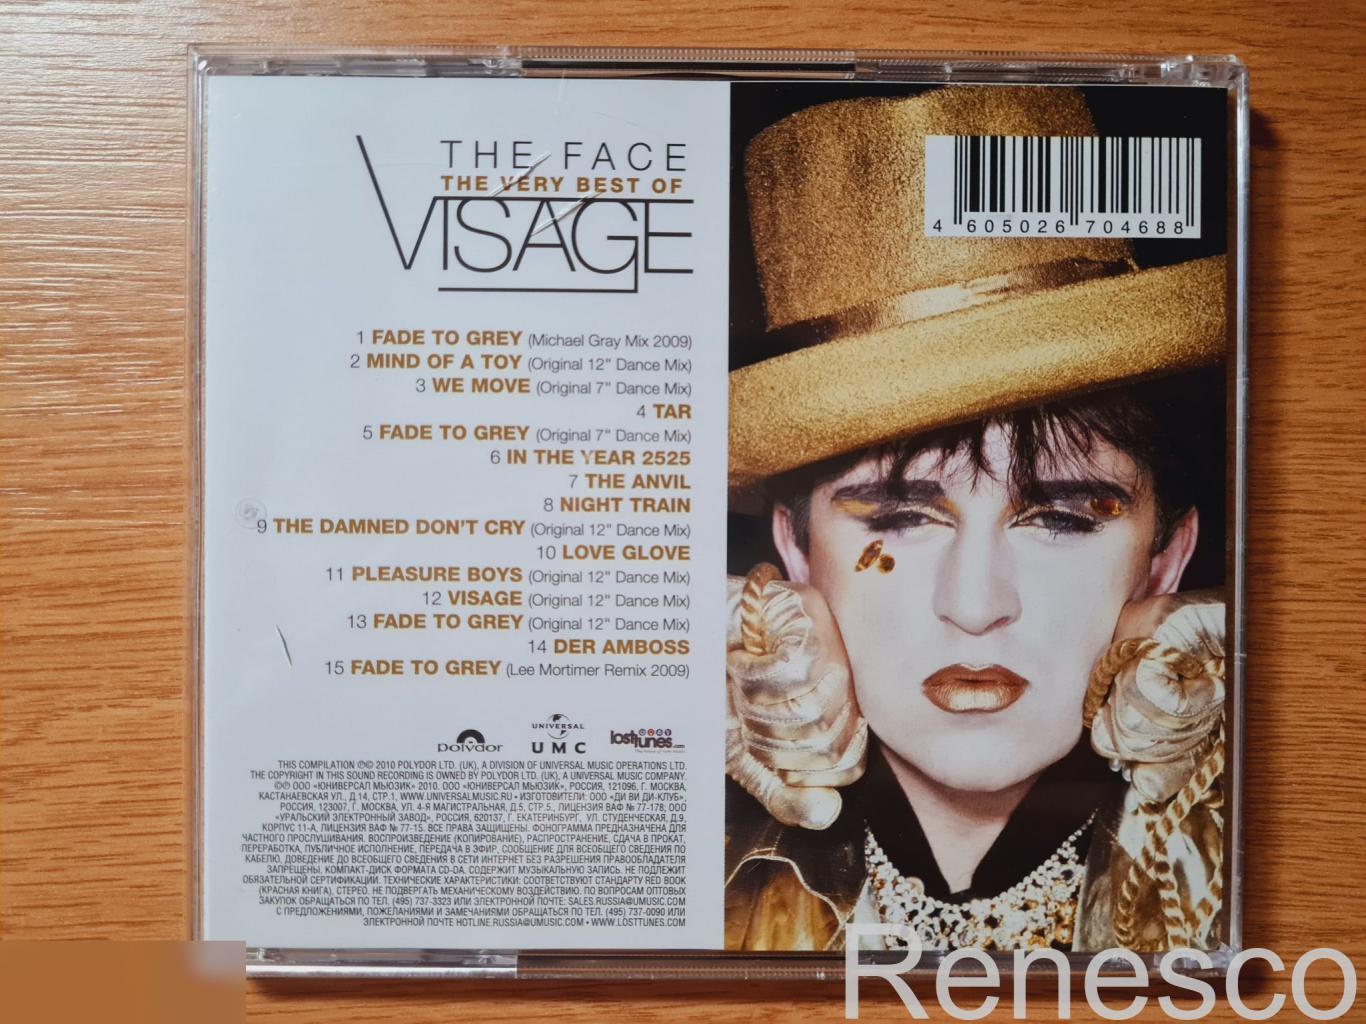 Visage ?– The Face (The Very Best Of Visage) (Russia) (2010) 1